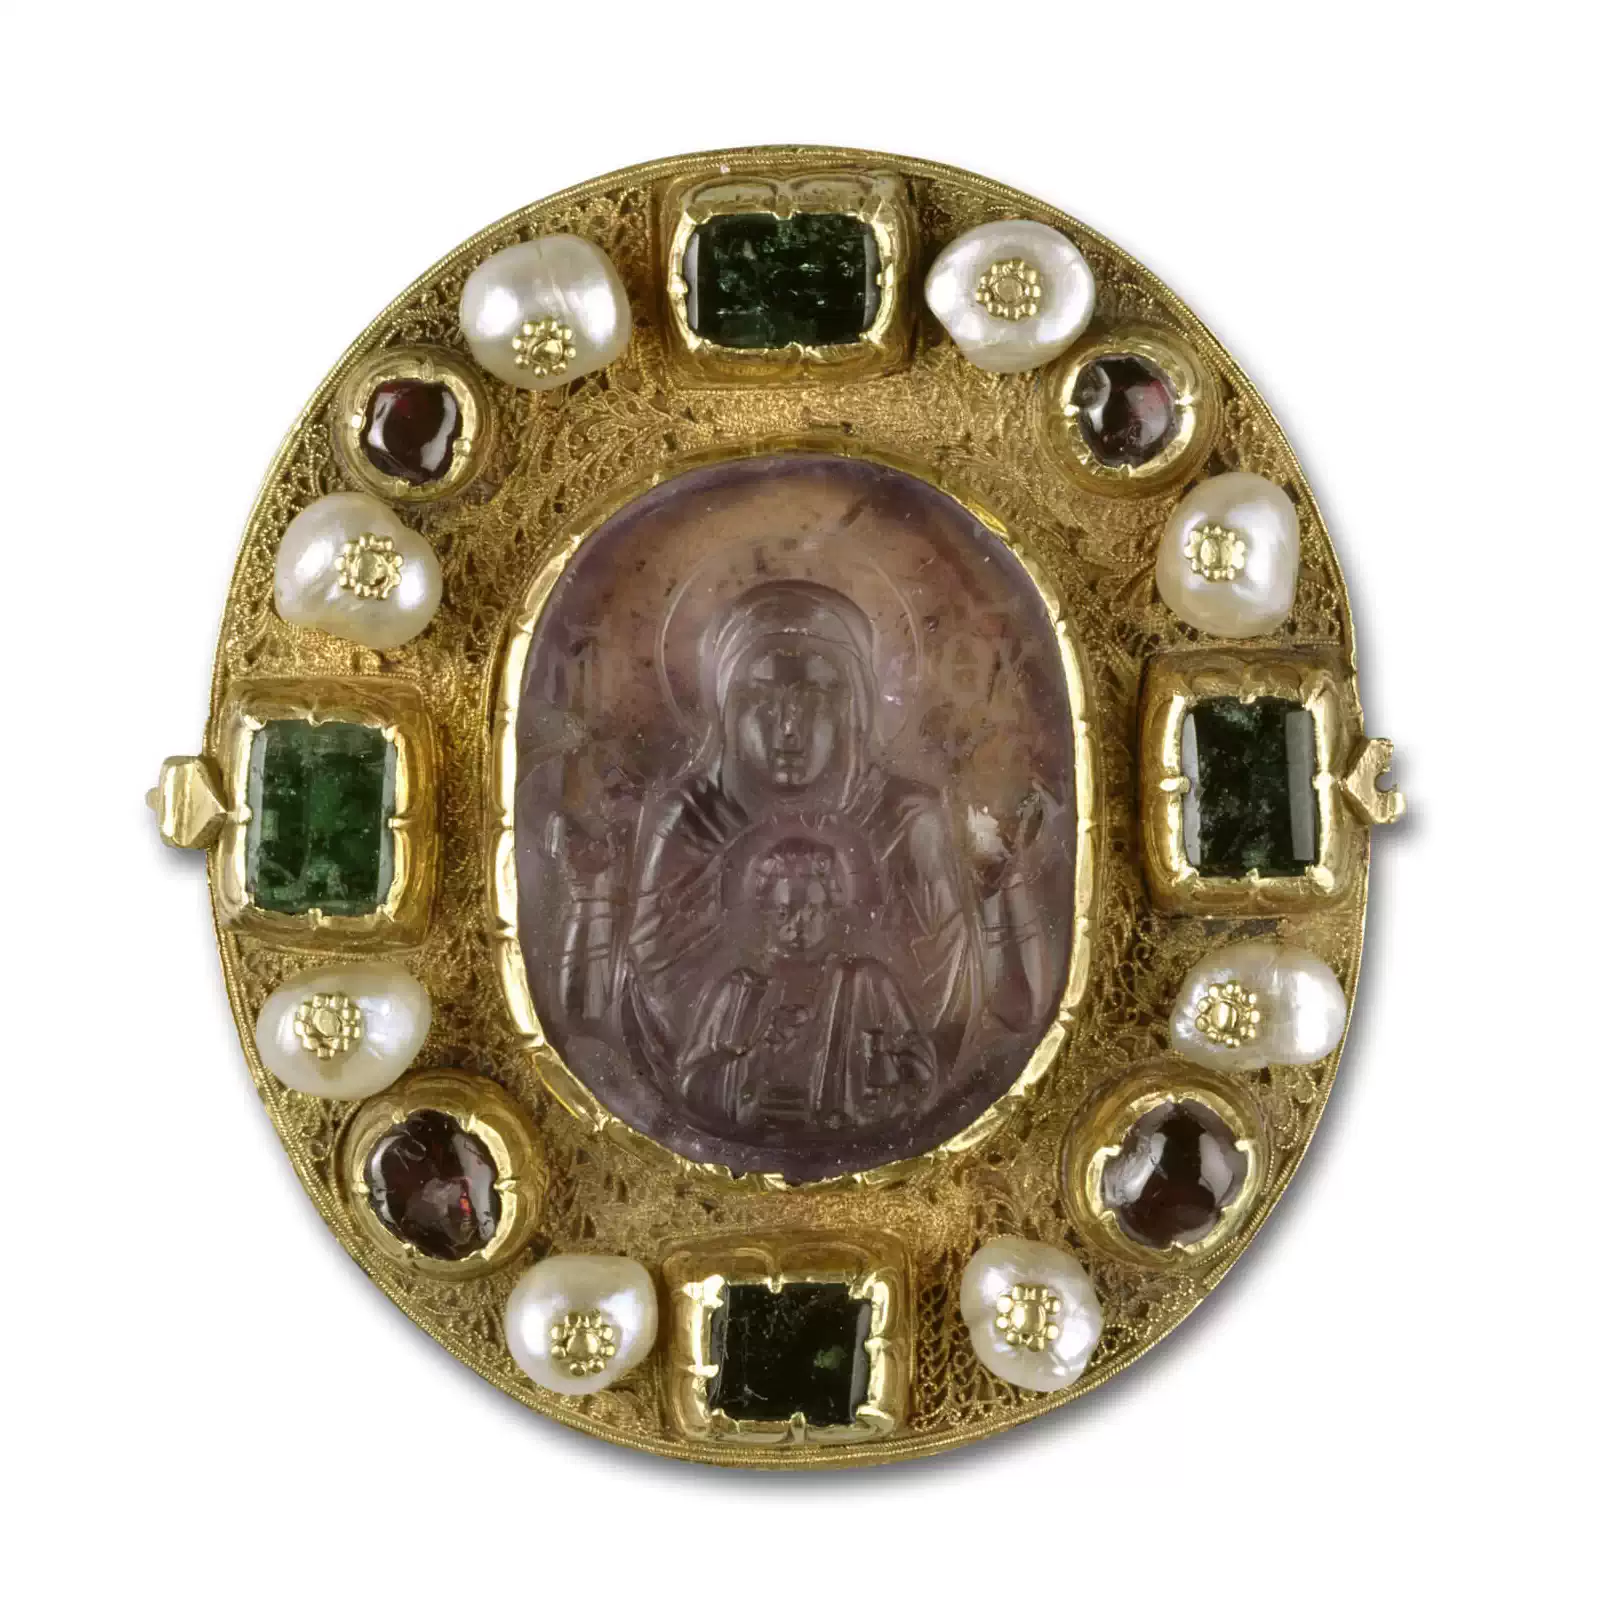 Oval gold pendant Virgin and Child engraved pink gem in center. Frame ornameted with 8 pearls, 4 green and 4 brown gemstones